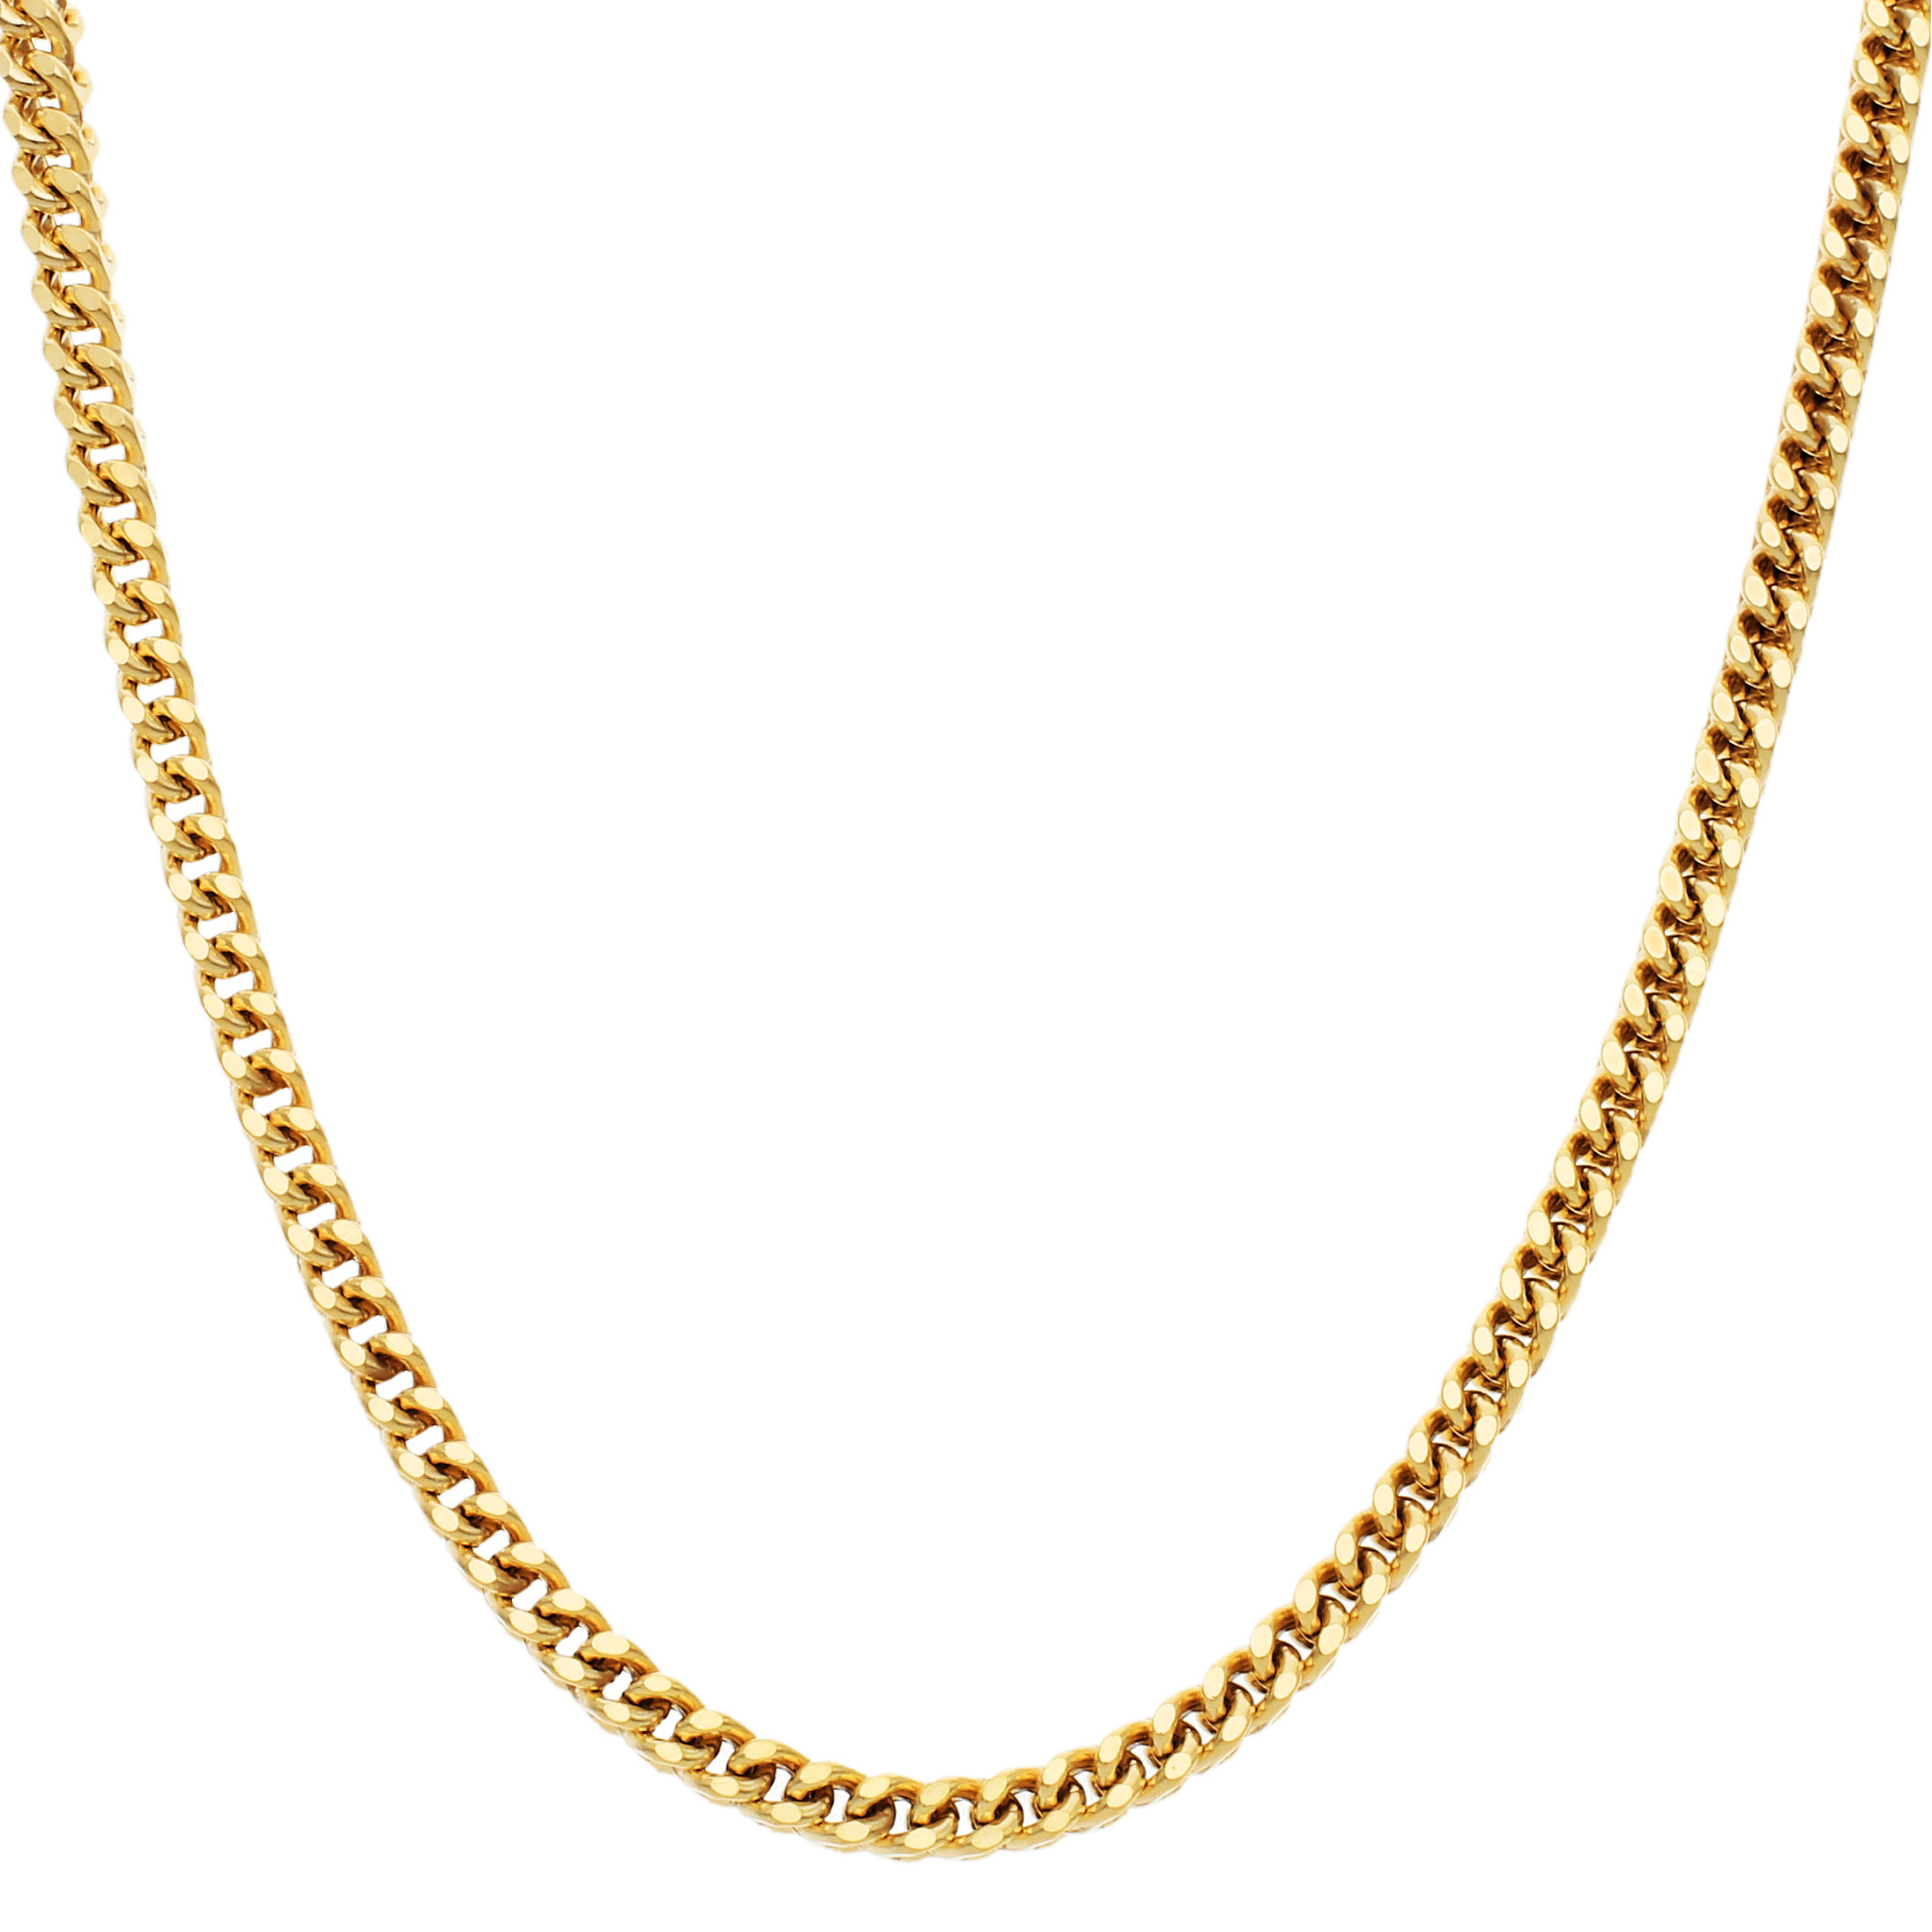 9ct Yellow Gold 3.5mm Square Franco Chain | Buy Online | Free Insured ...